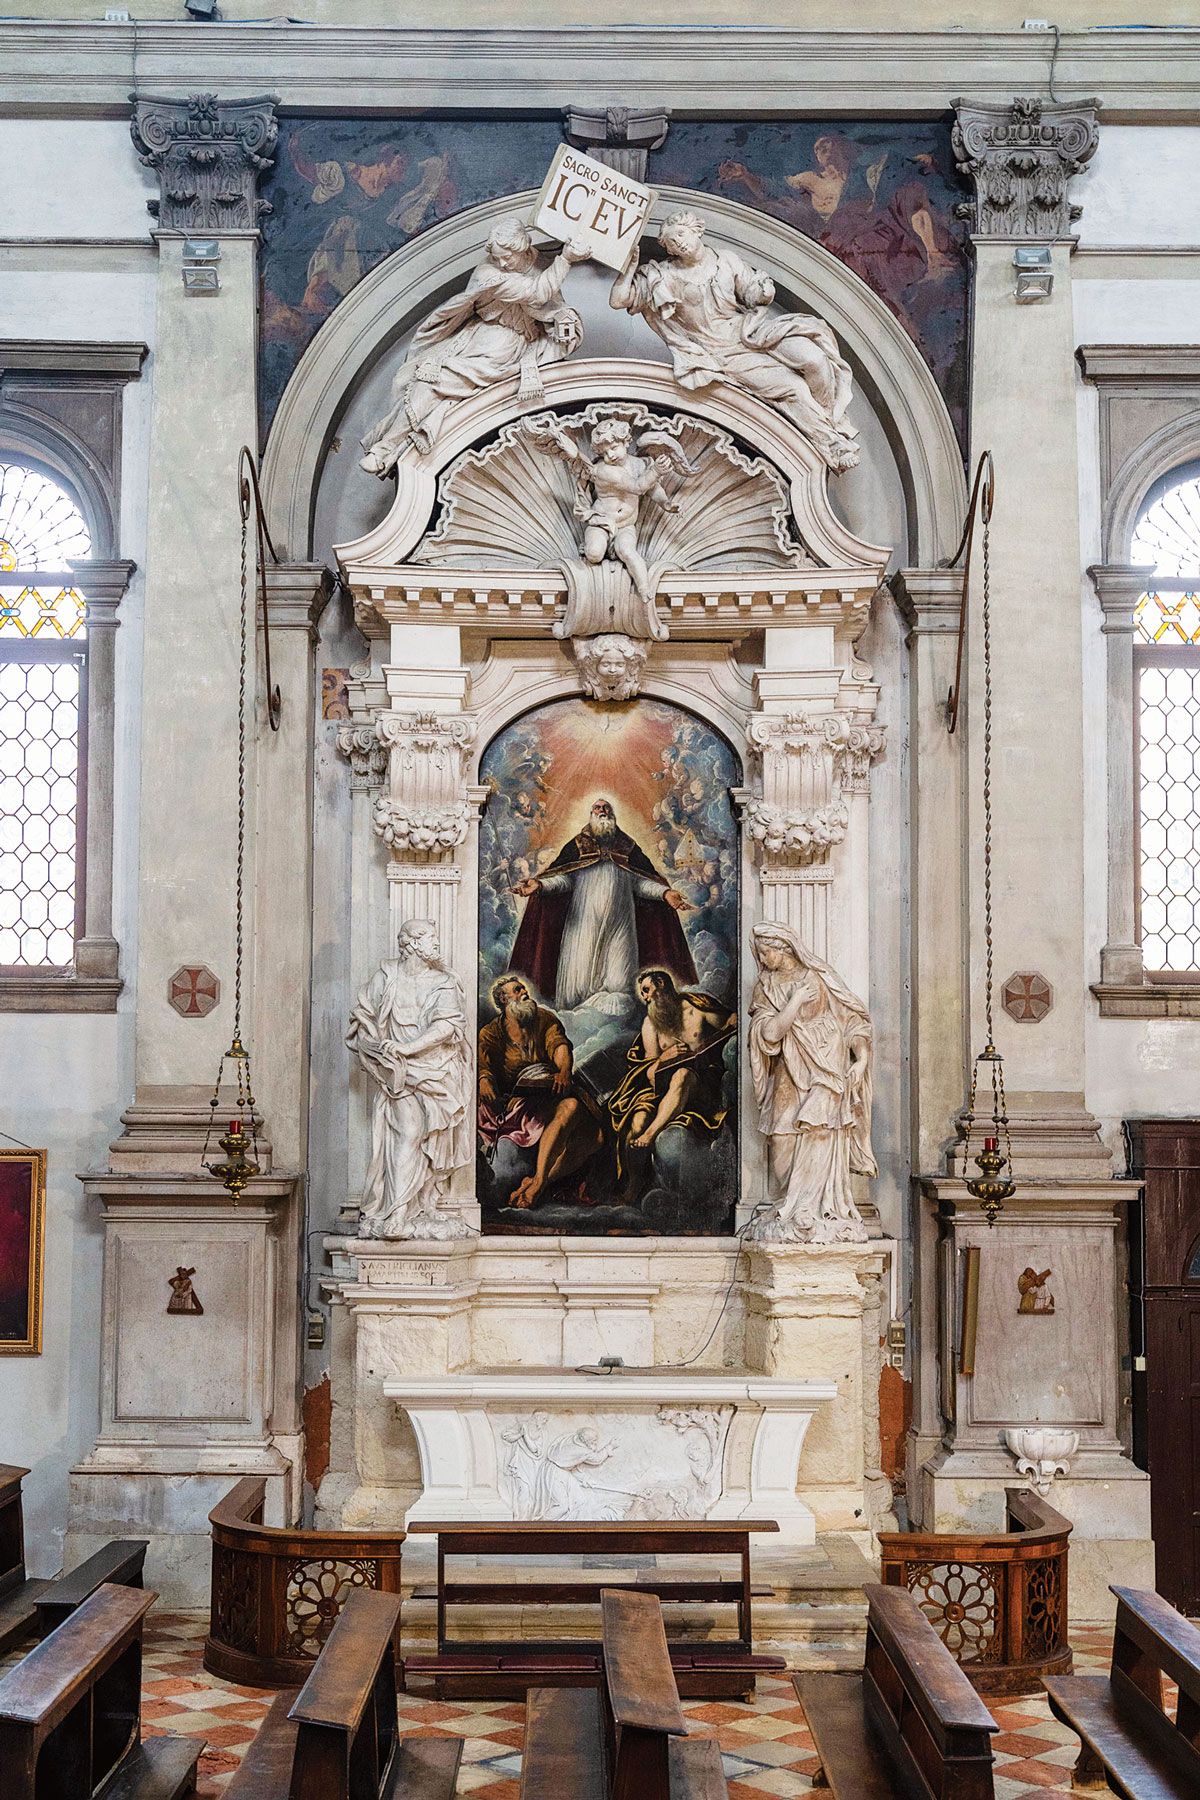 Giulia Lama’s spandrel paintings of Saint Luke and Saint John at San Marziale church can be seen above Tintoretto’s Saint Martial in Glory with Saints Peter and Paul, an altarpiece restored by Save Venice in 2018 Photo: Matteo De Fina; courtesy of Save Venice